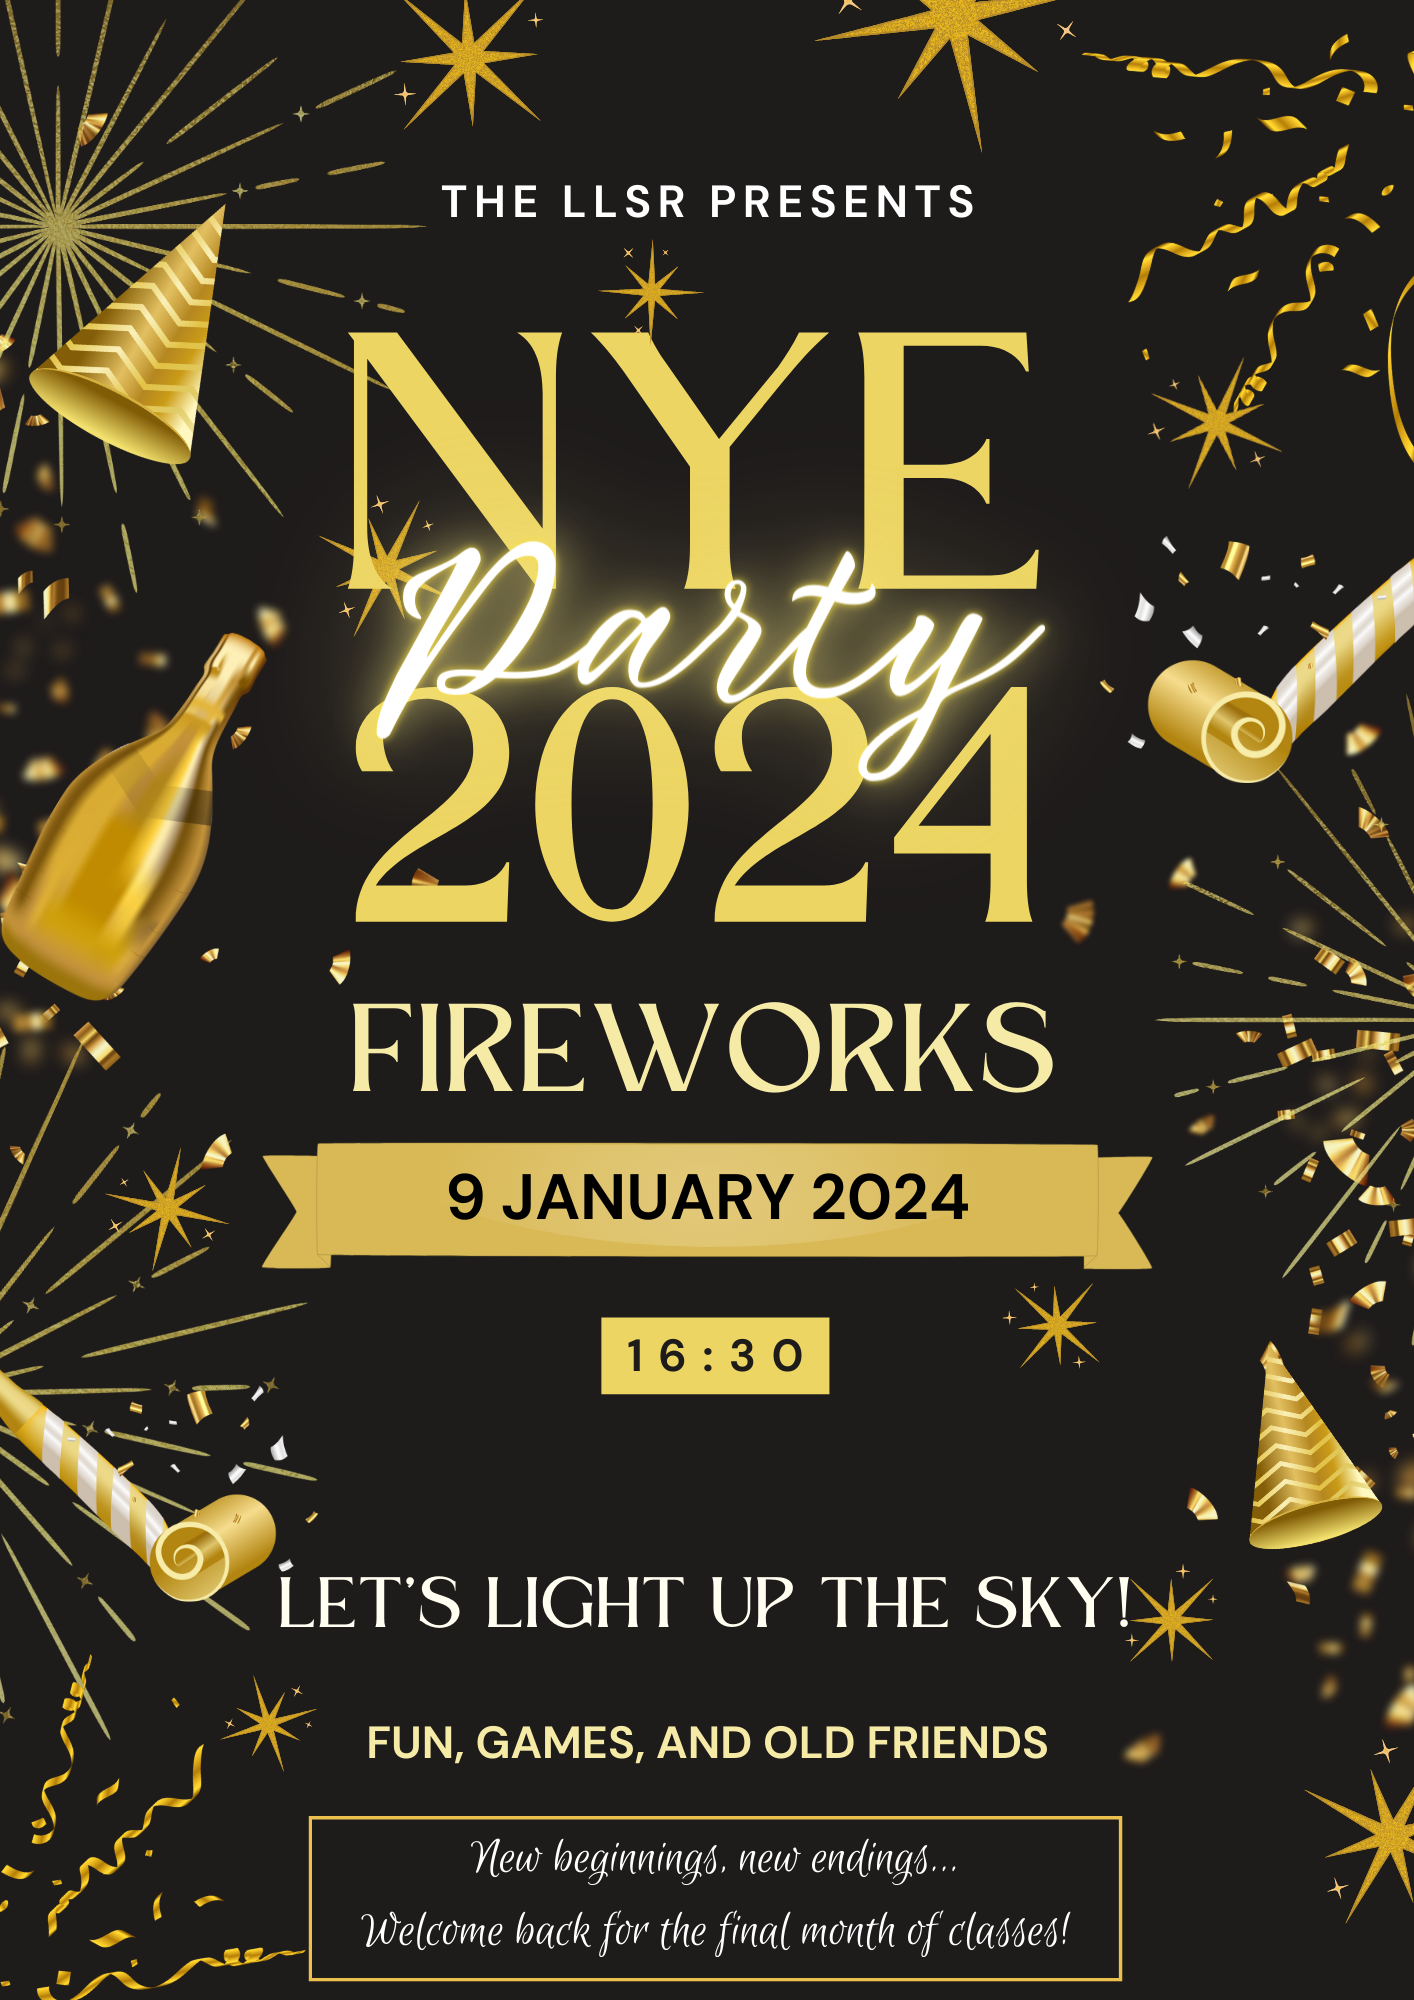 New Year's Eve party flyer, January 9th 2024, 16:30